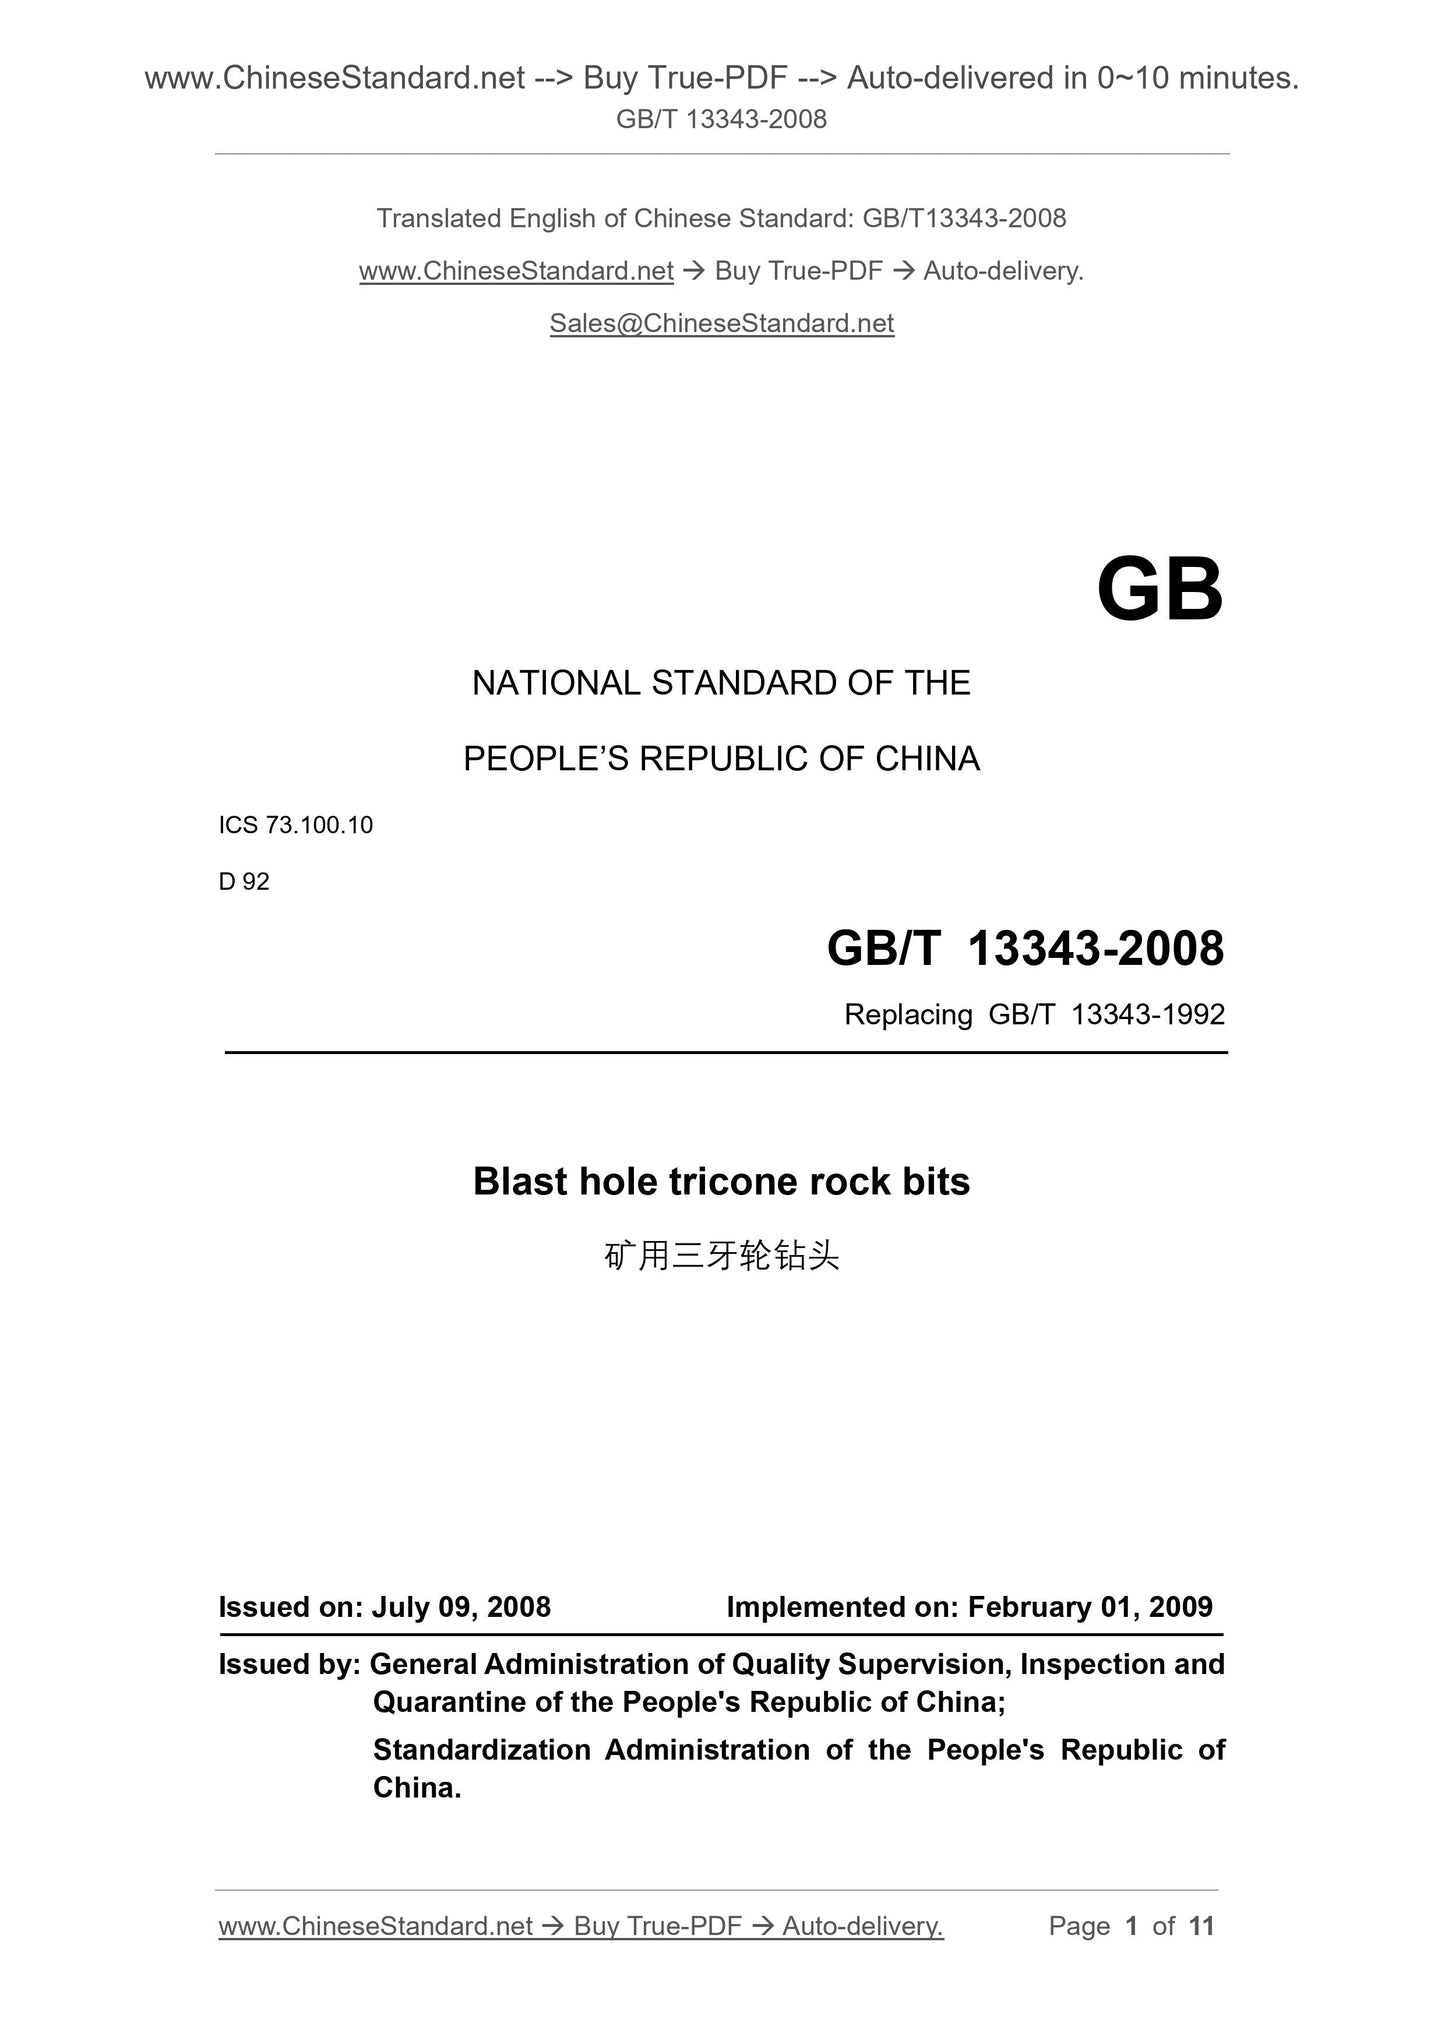 GB/T 13343-2008 Page 1